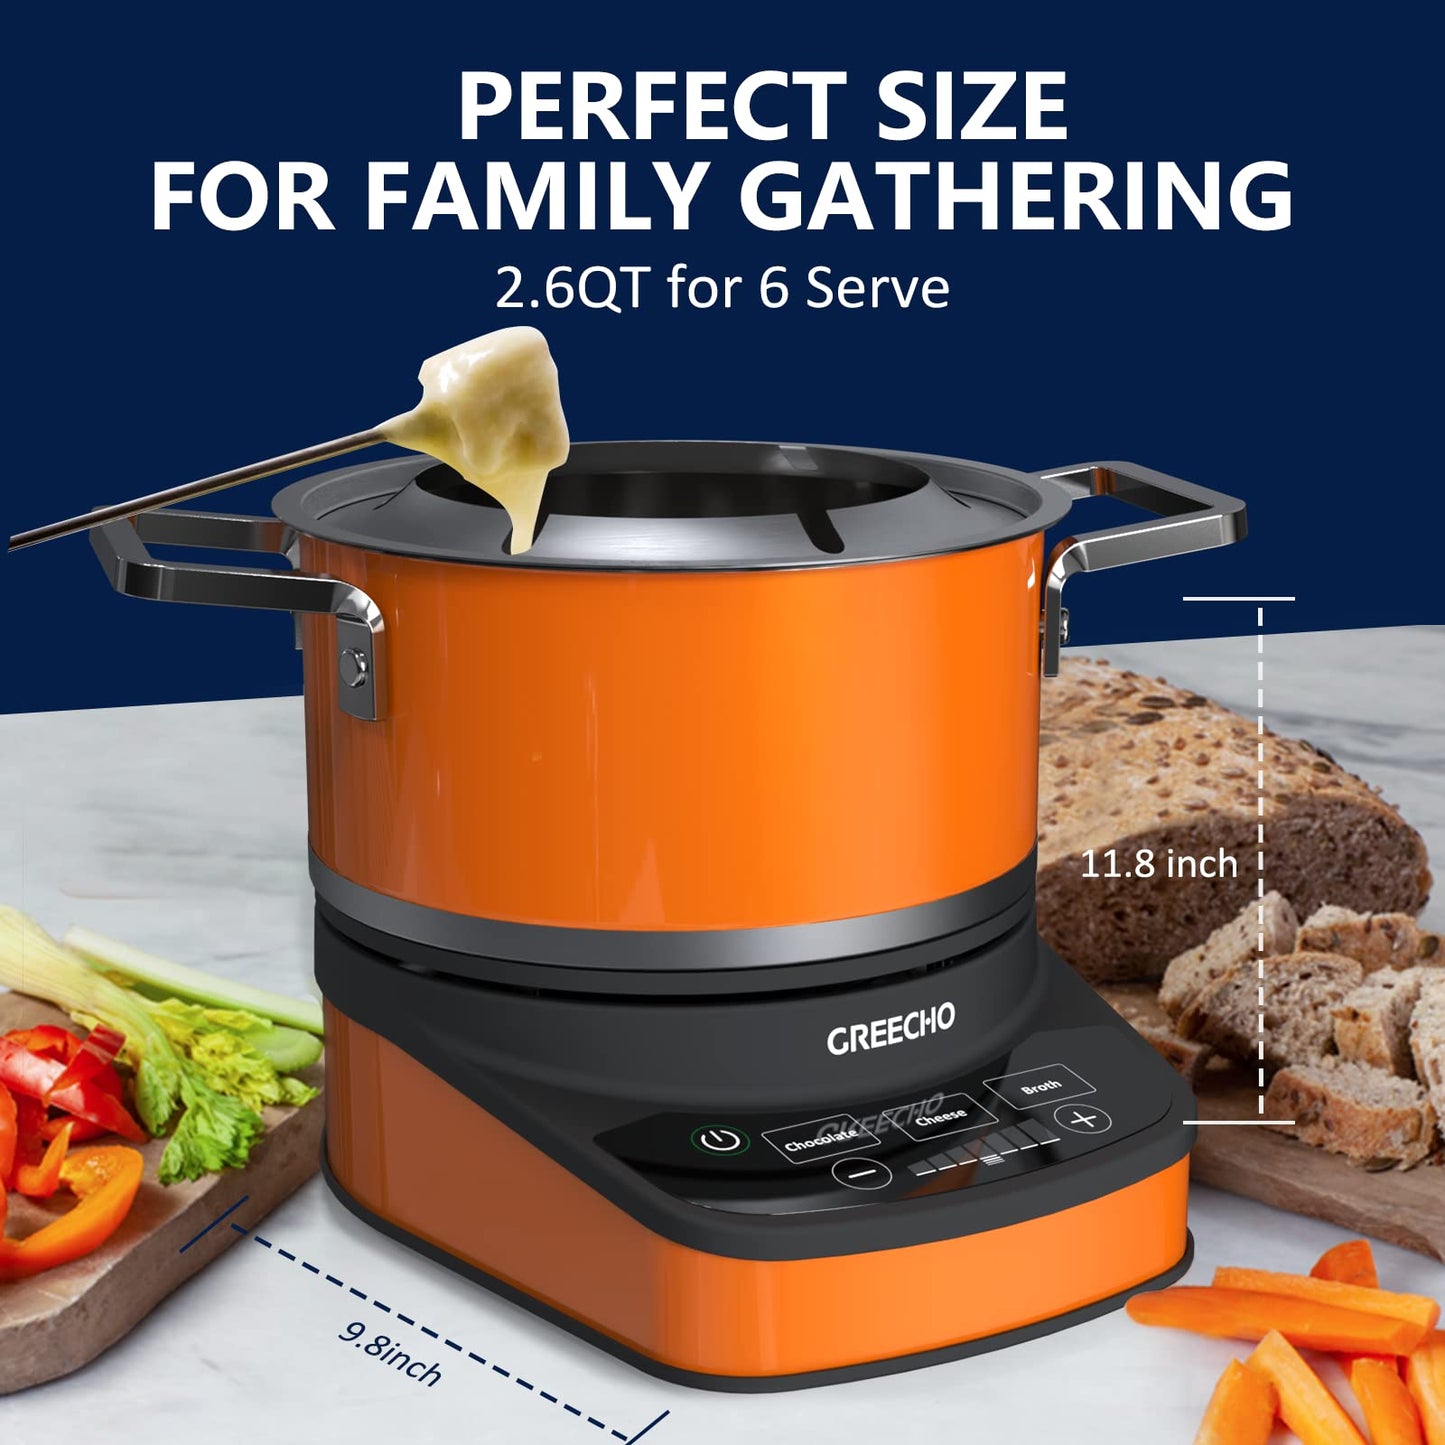 GREECHO Fondue Pot Electric Set, 2.6 Qt Stainless Steel Electric Fondue Pot with 3 Preset Mode (Cheese, Chocolate & Broth), 1200W Fondue Pot Set with Separated Fondue Pot & 6 Color-Coded Forks, Orange